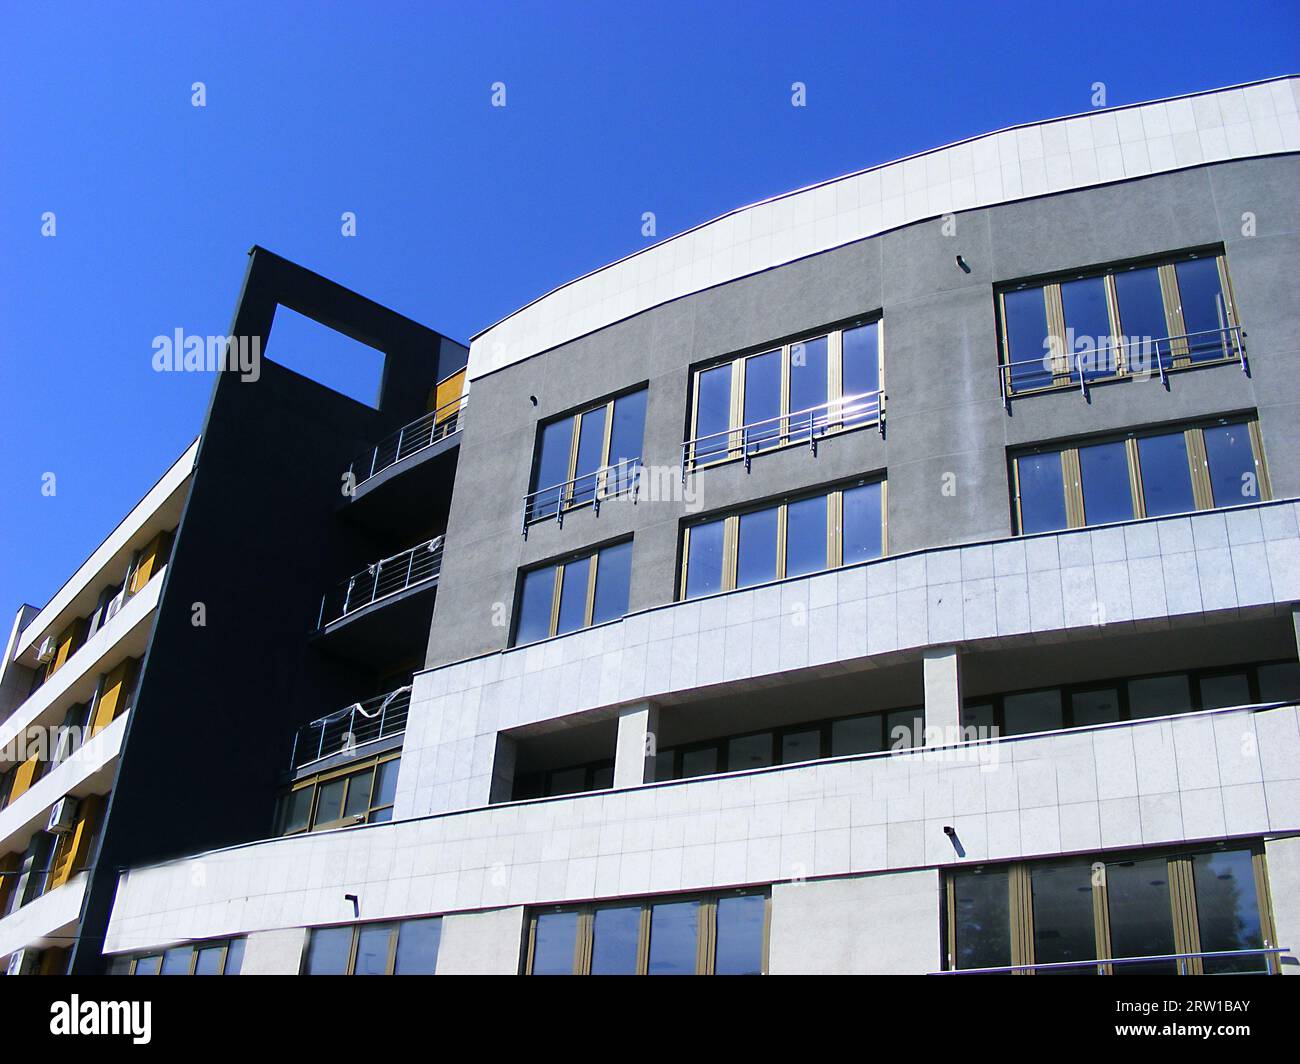 Modern design architecture in urban big city, combination of steel, bricks and glass elements Stock Photo